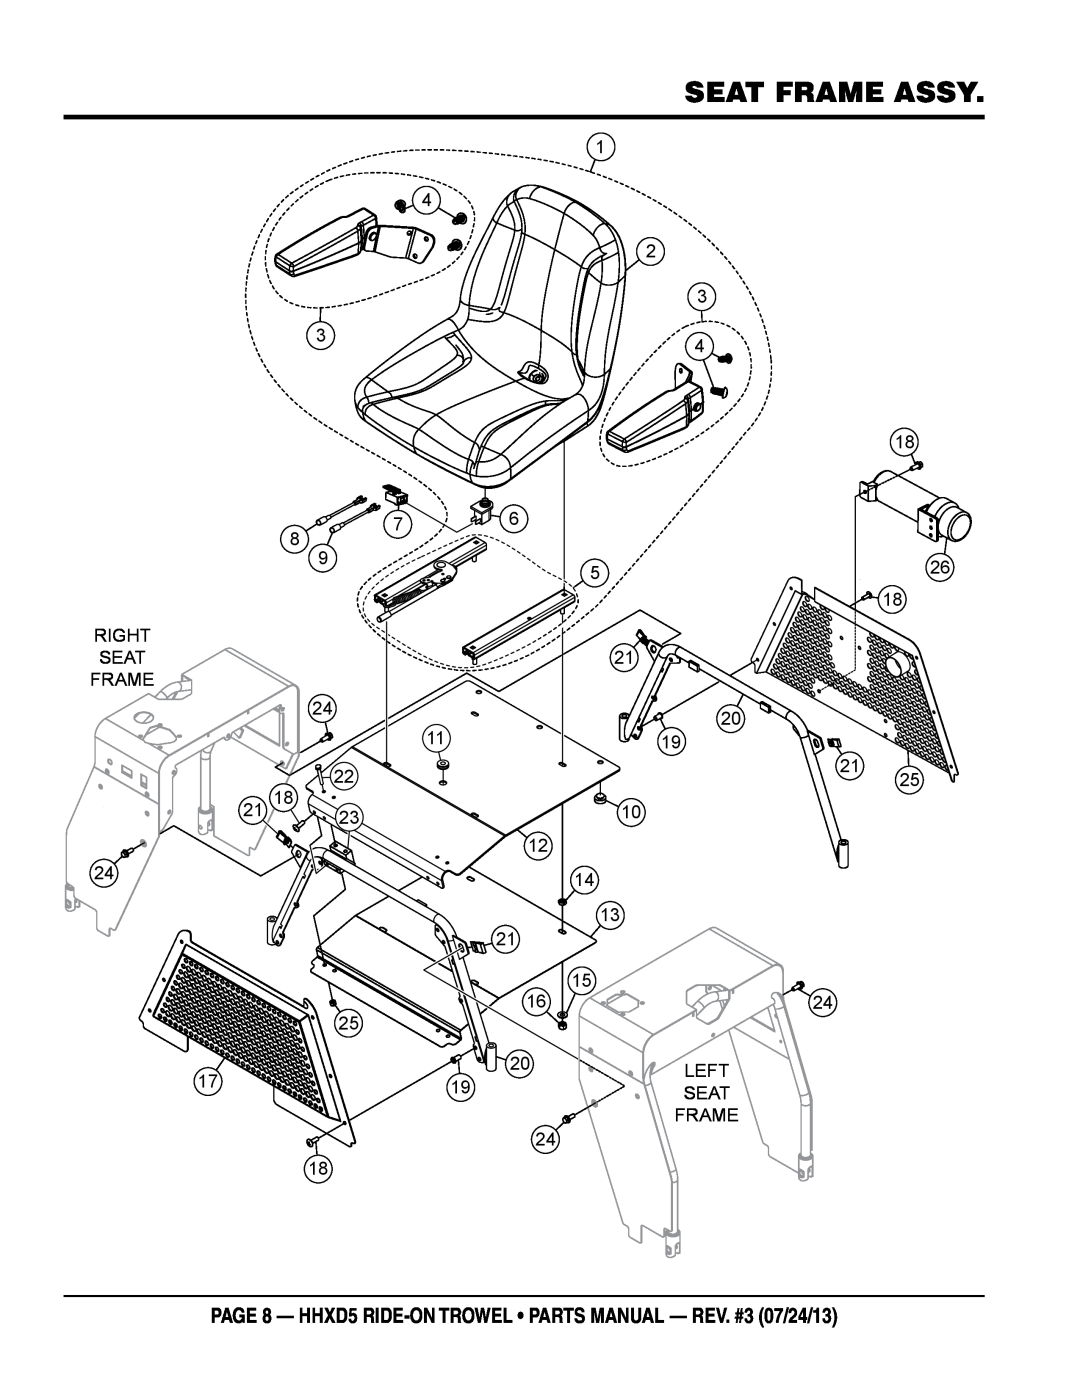 Multiquip HHSD5 Seat Frame Assy, page 8 - HHXD5 RIDE-ON TROWEL parts manual - rev. #3 07/24/13, Right Seat Frame 